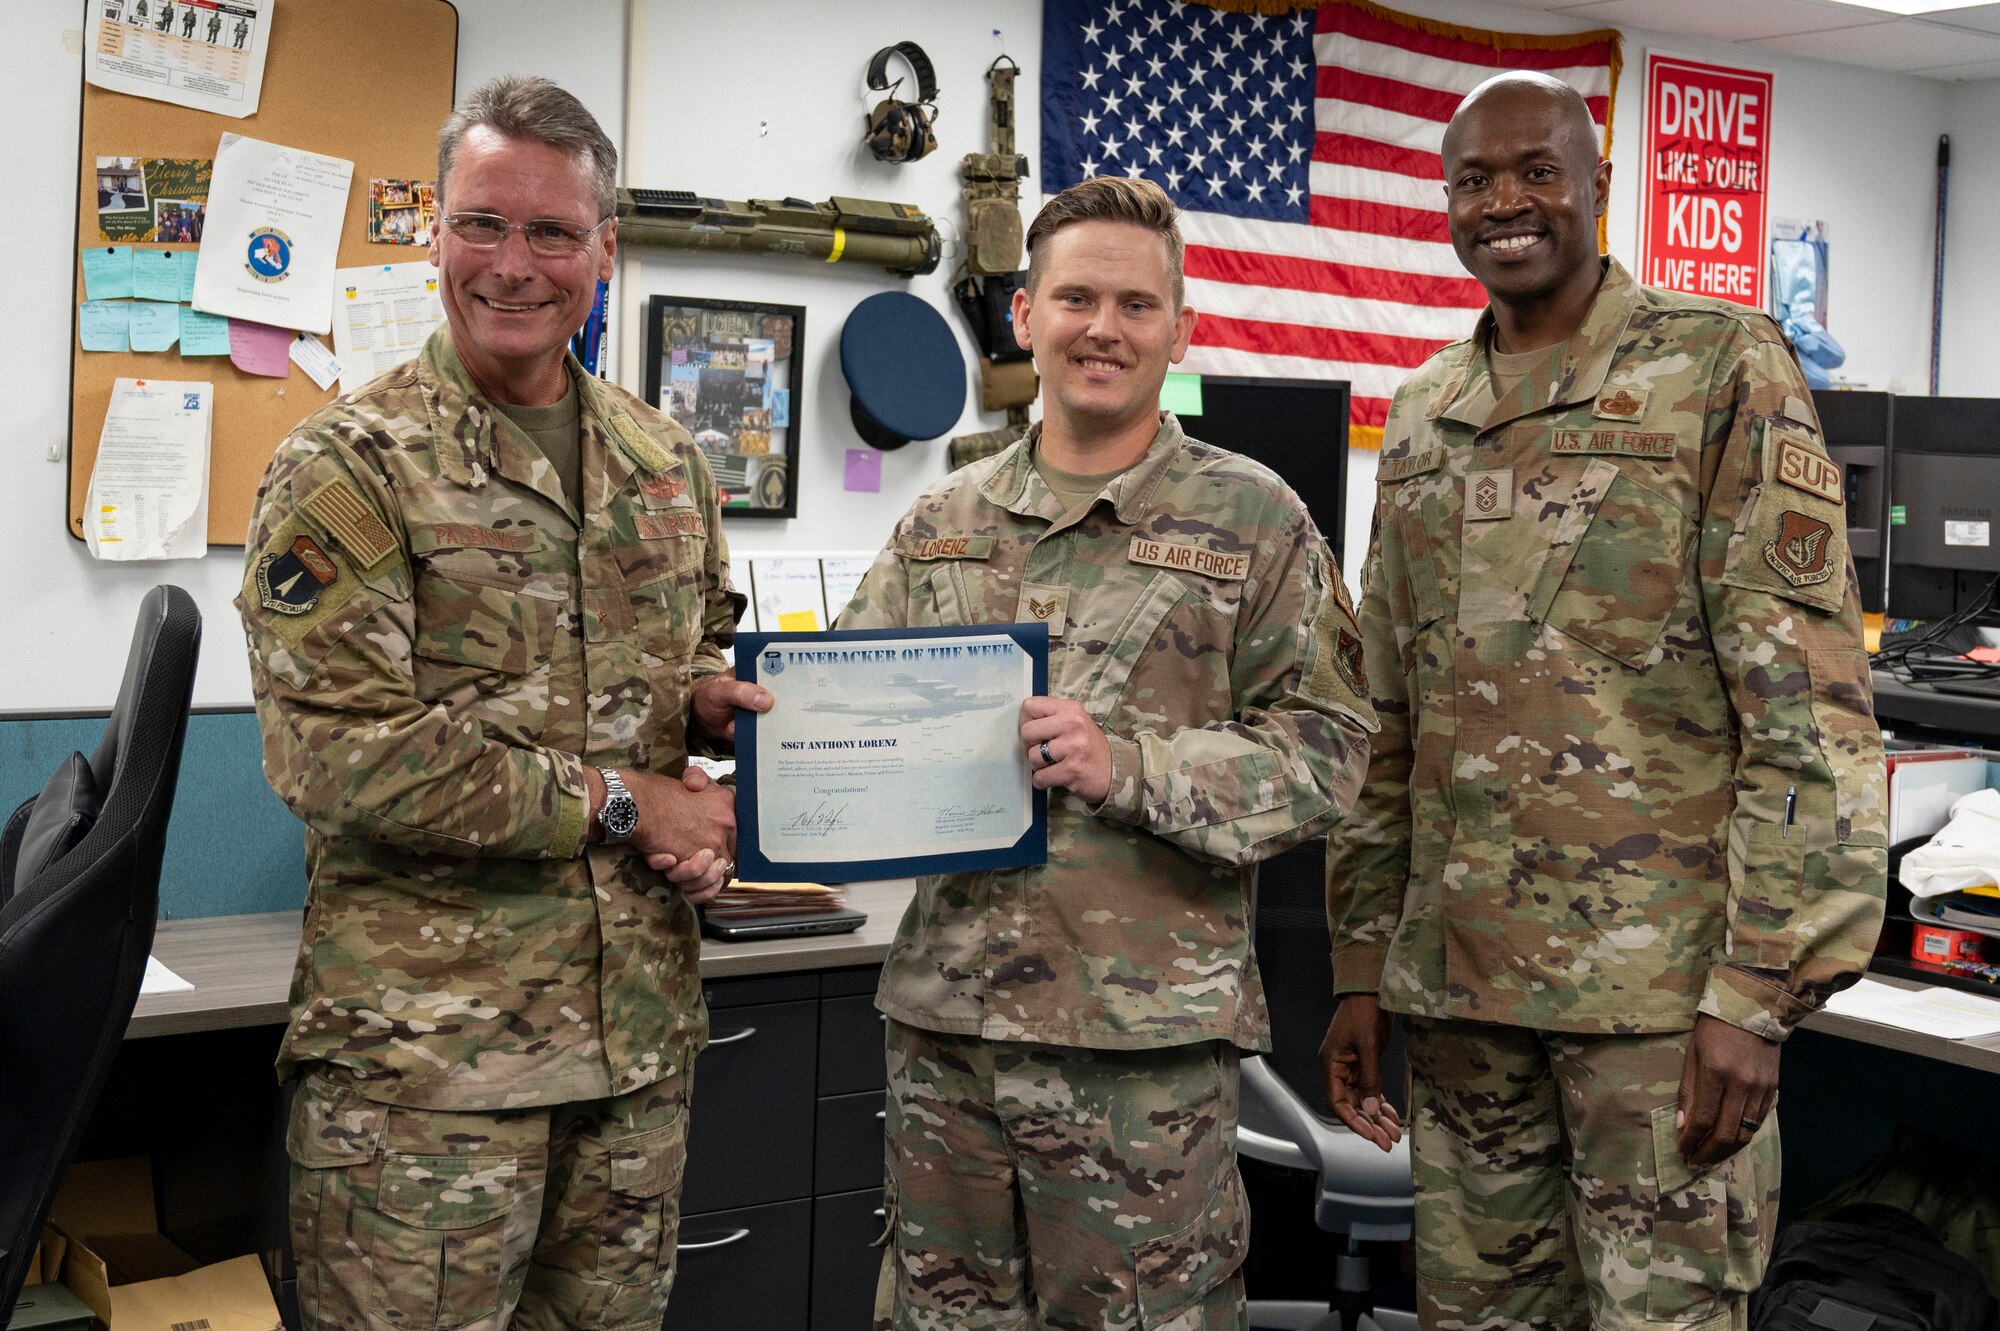 U.S. Air Force Staff Sgt. Anthony Lorenz, the unit deployment manager assigned to the 36th Force Support Squadron, receives the Linebacker of the Week Award from U.S. Air Force Brig. Gen. Thomas Palenske, commander of the 36th Wing, and U.S. Air Force Chief Master Sgt. Nicholas Taylor, command chief of the 36th Wing, at Andersen Air Force Base, Guam, Nov. 1, 2023. The Team Andersen Linebacker of the Week recognizes outstanding enlisted, officer, civilian and total force personnel who have had an impact on achieving Team Andersen’s mission, vision and priorities. (U.S. Air Force photo by Senior Airman Emily Saxton)